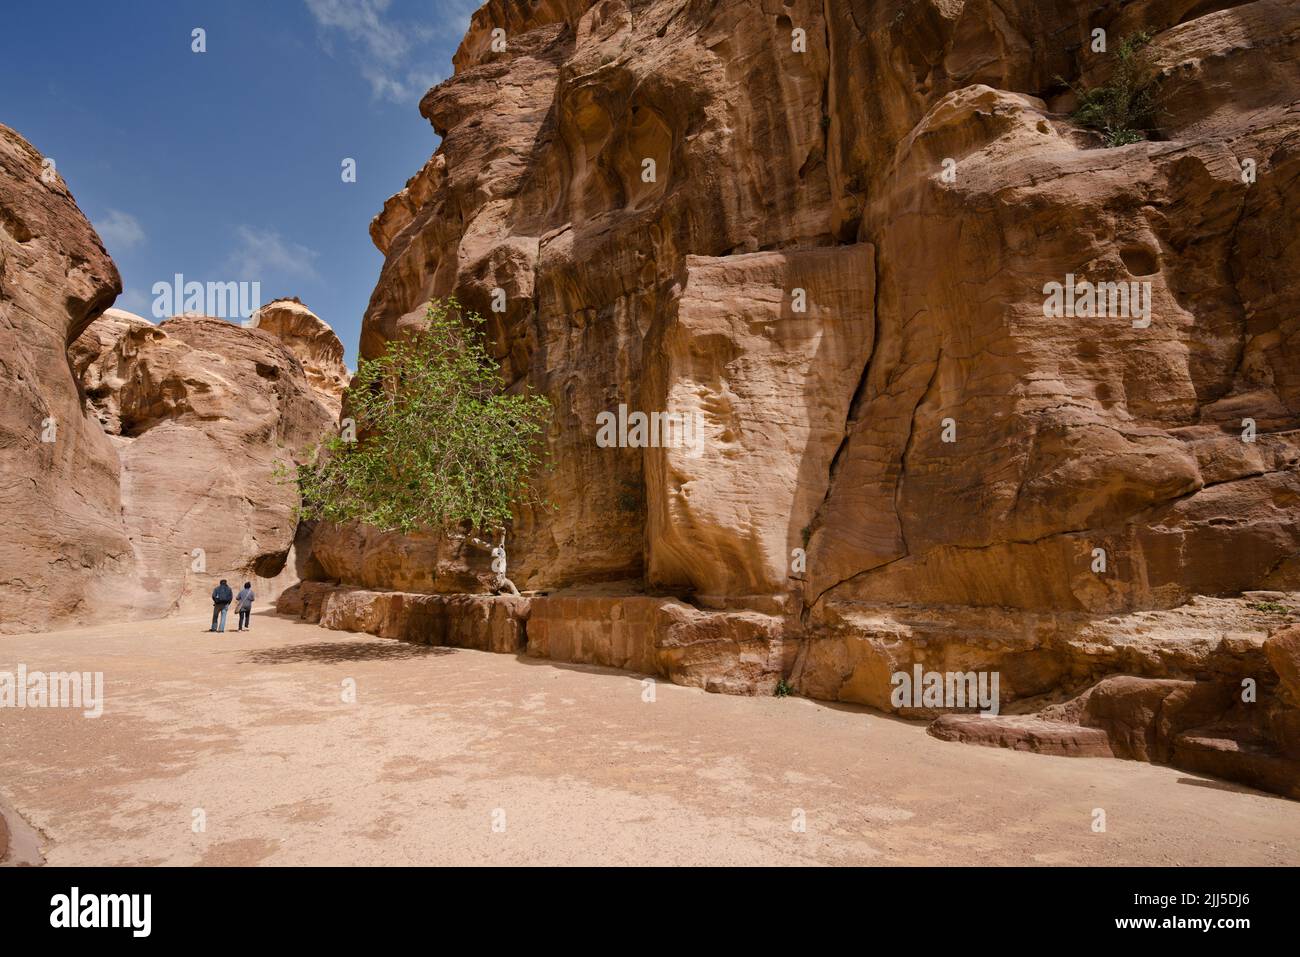 Tourists walks in the Siq, the canyon of ancient Petra. Since 1985, Petra is listed as UNESCO World Heritage site Stock Photo